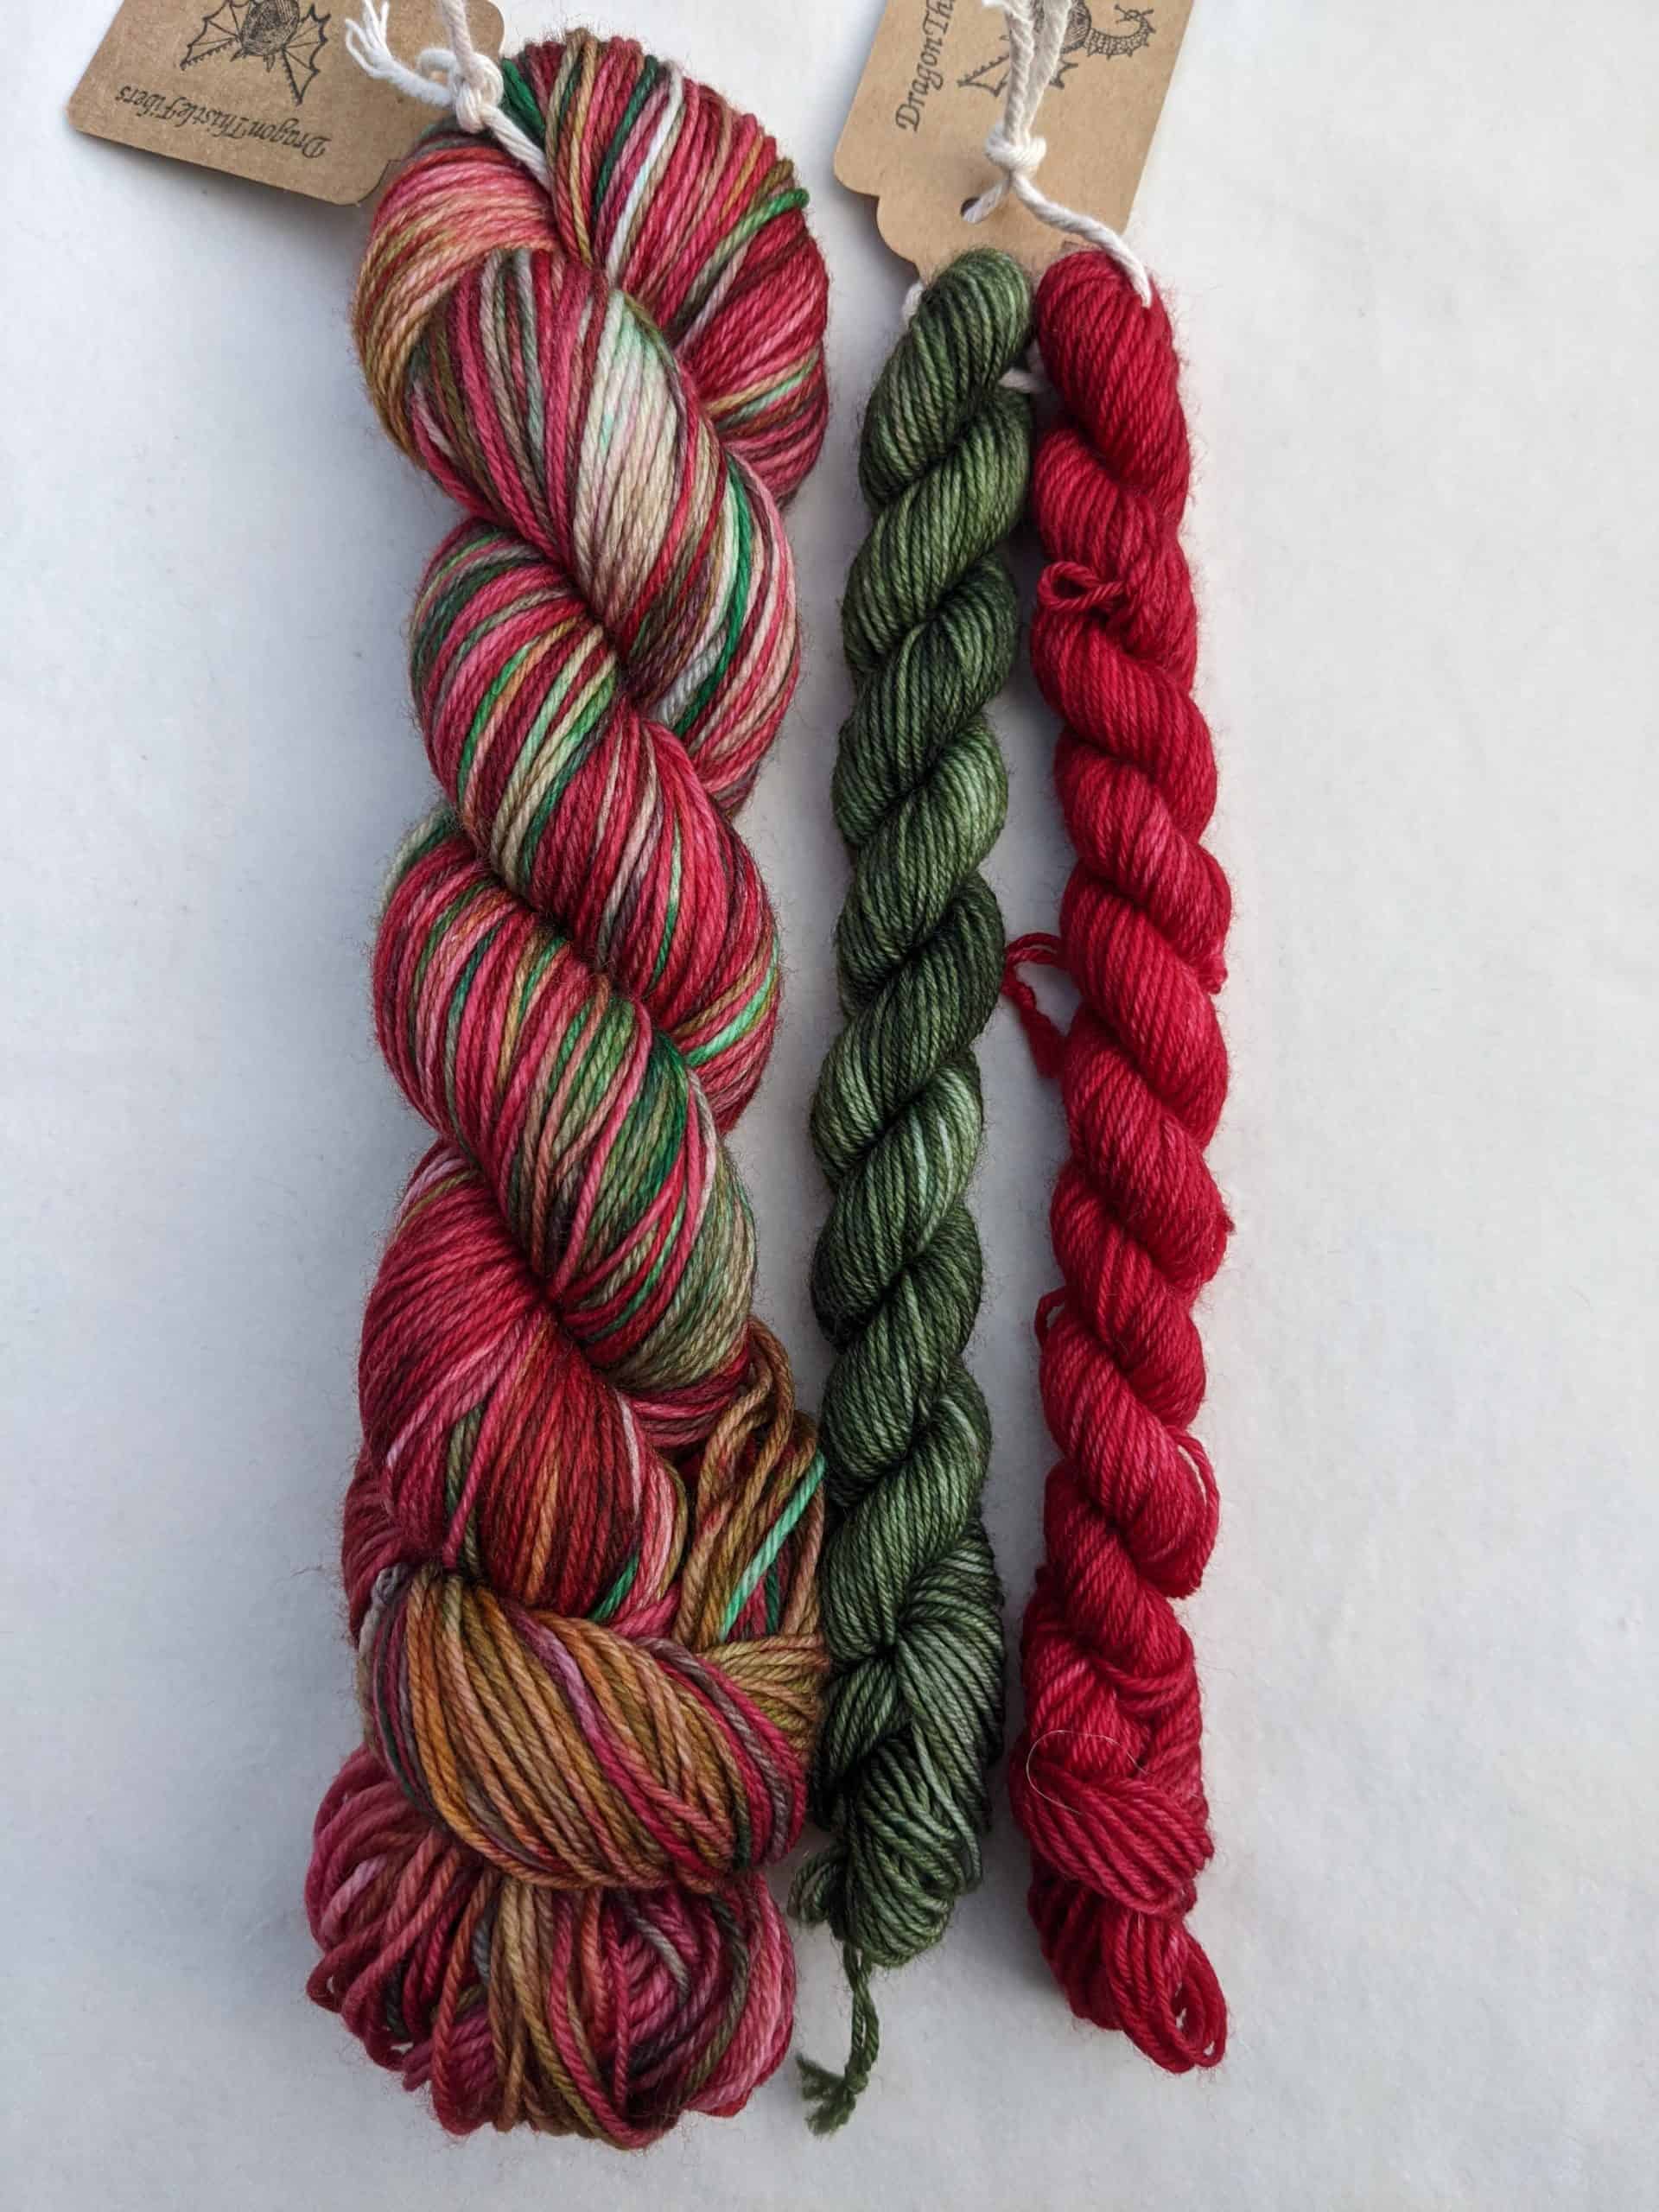 Red and green yarn.